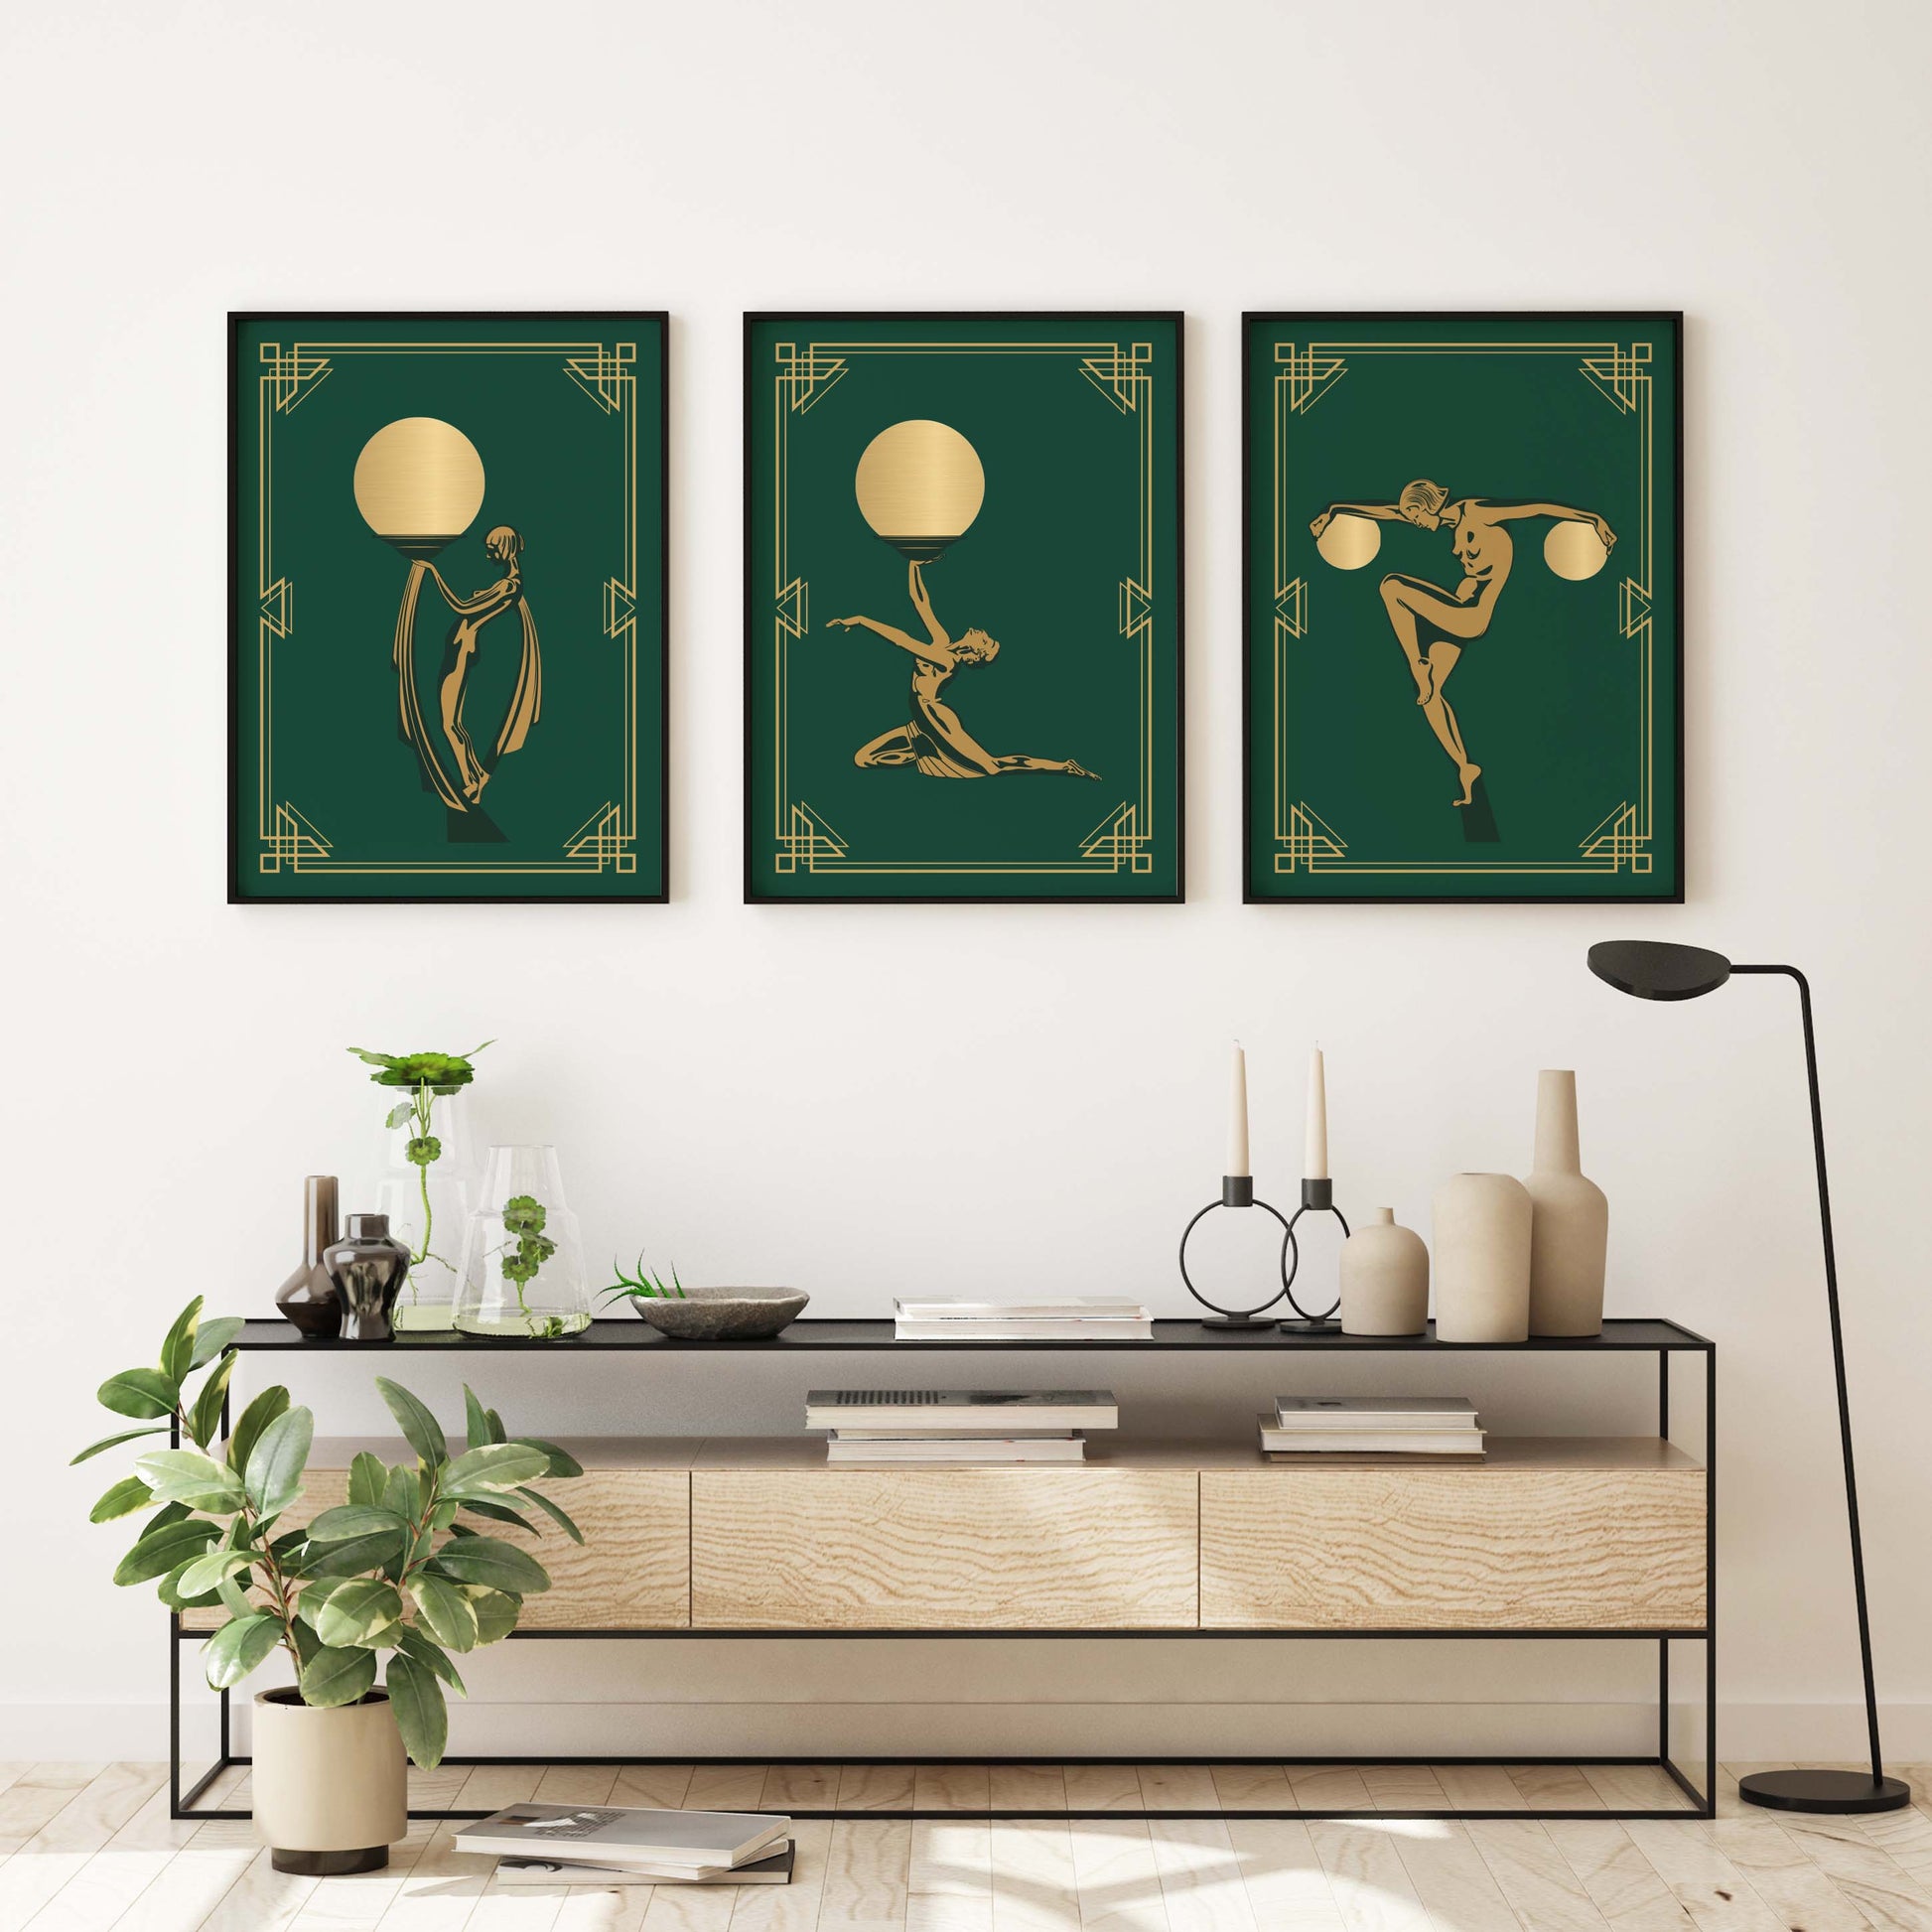 Set of art deco posters in green and gold